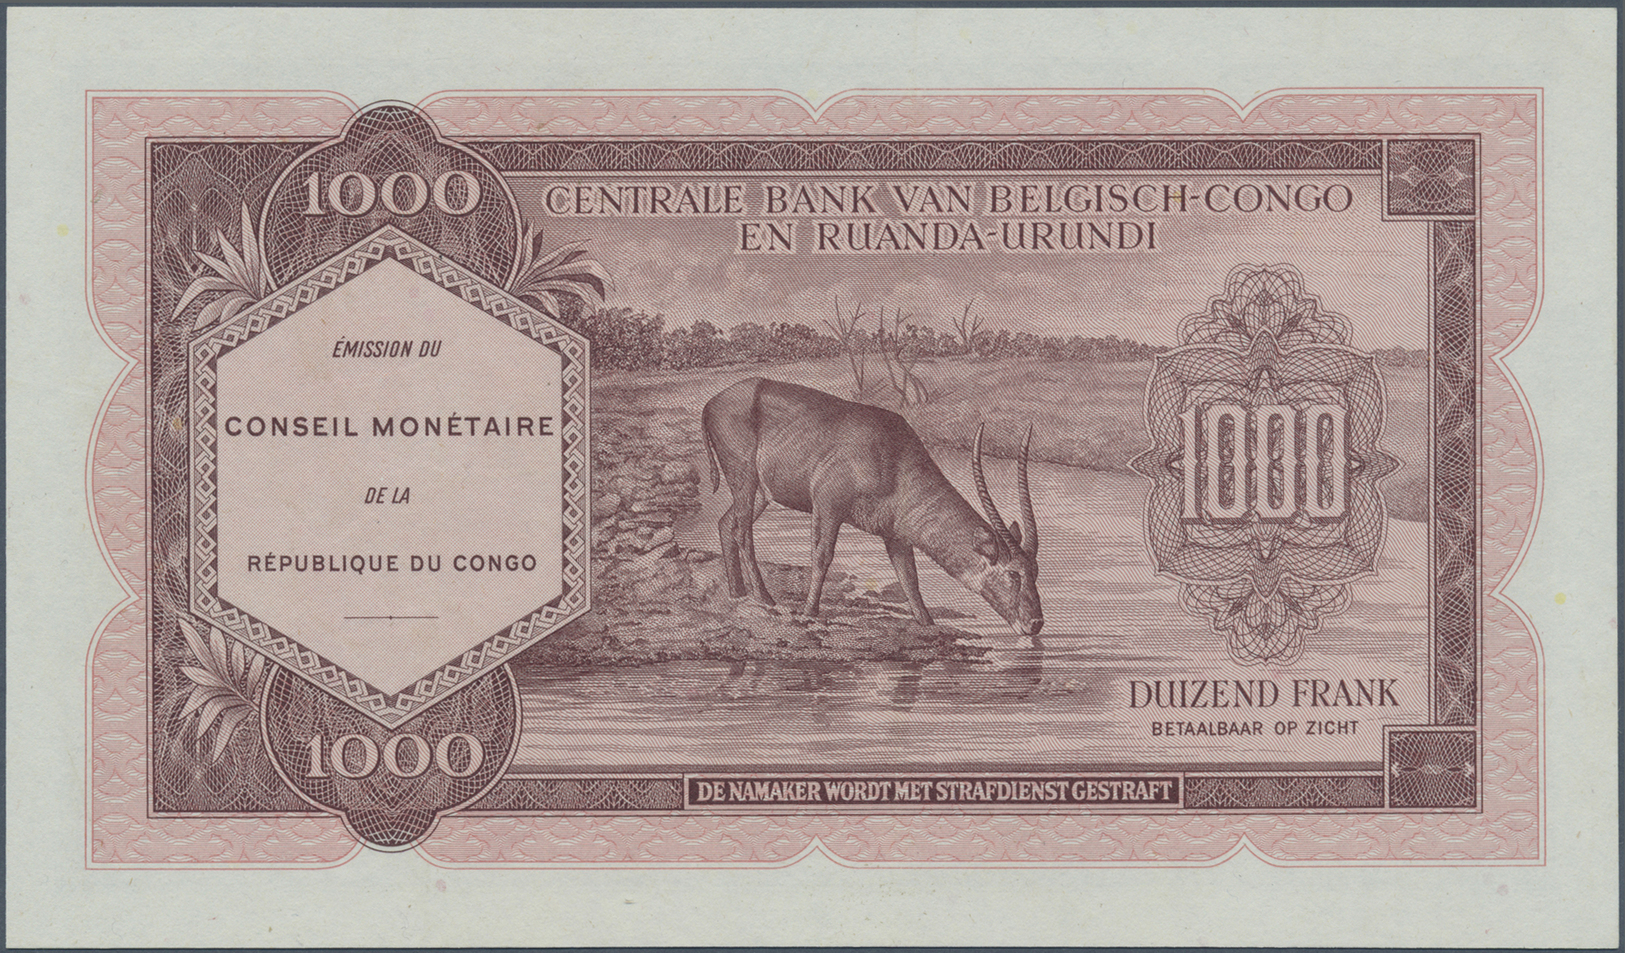 00581 Congo / Kongo: 1000 Francs 1962 P. 62a, PMG Graded: 50 About Uncirculated - Unclassified